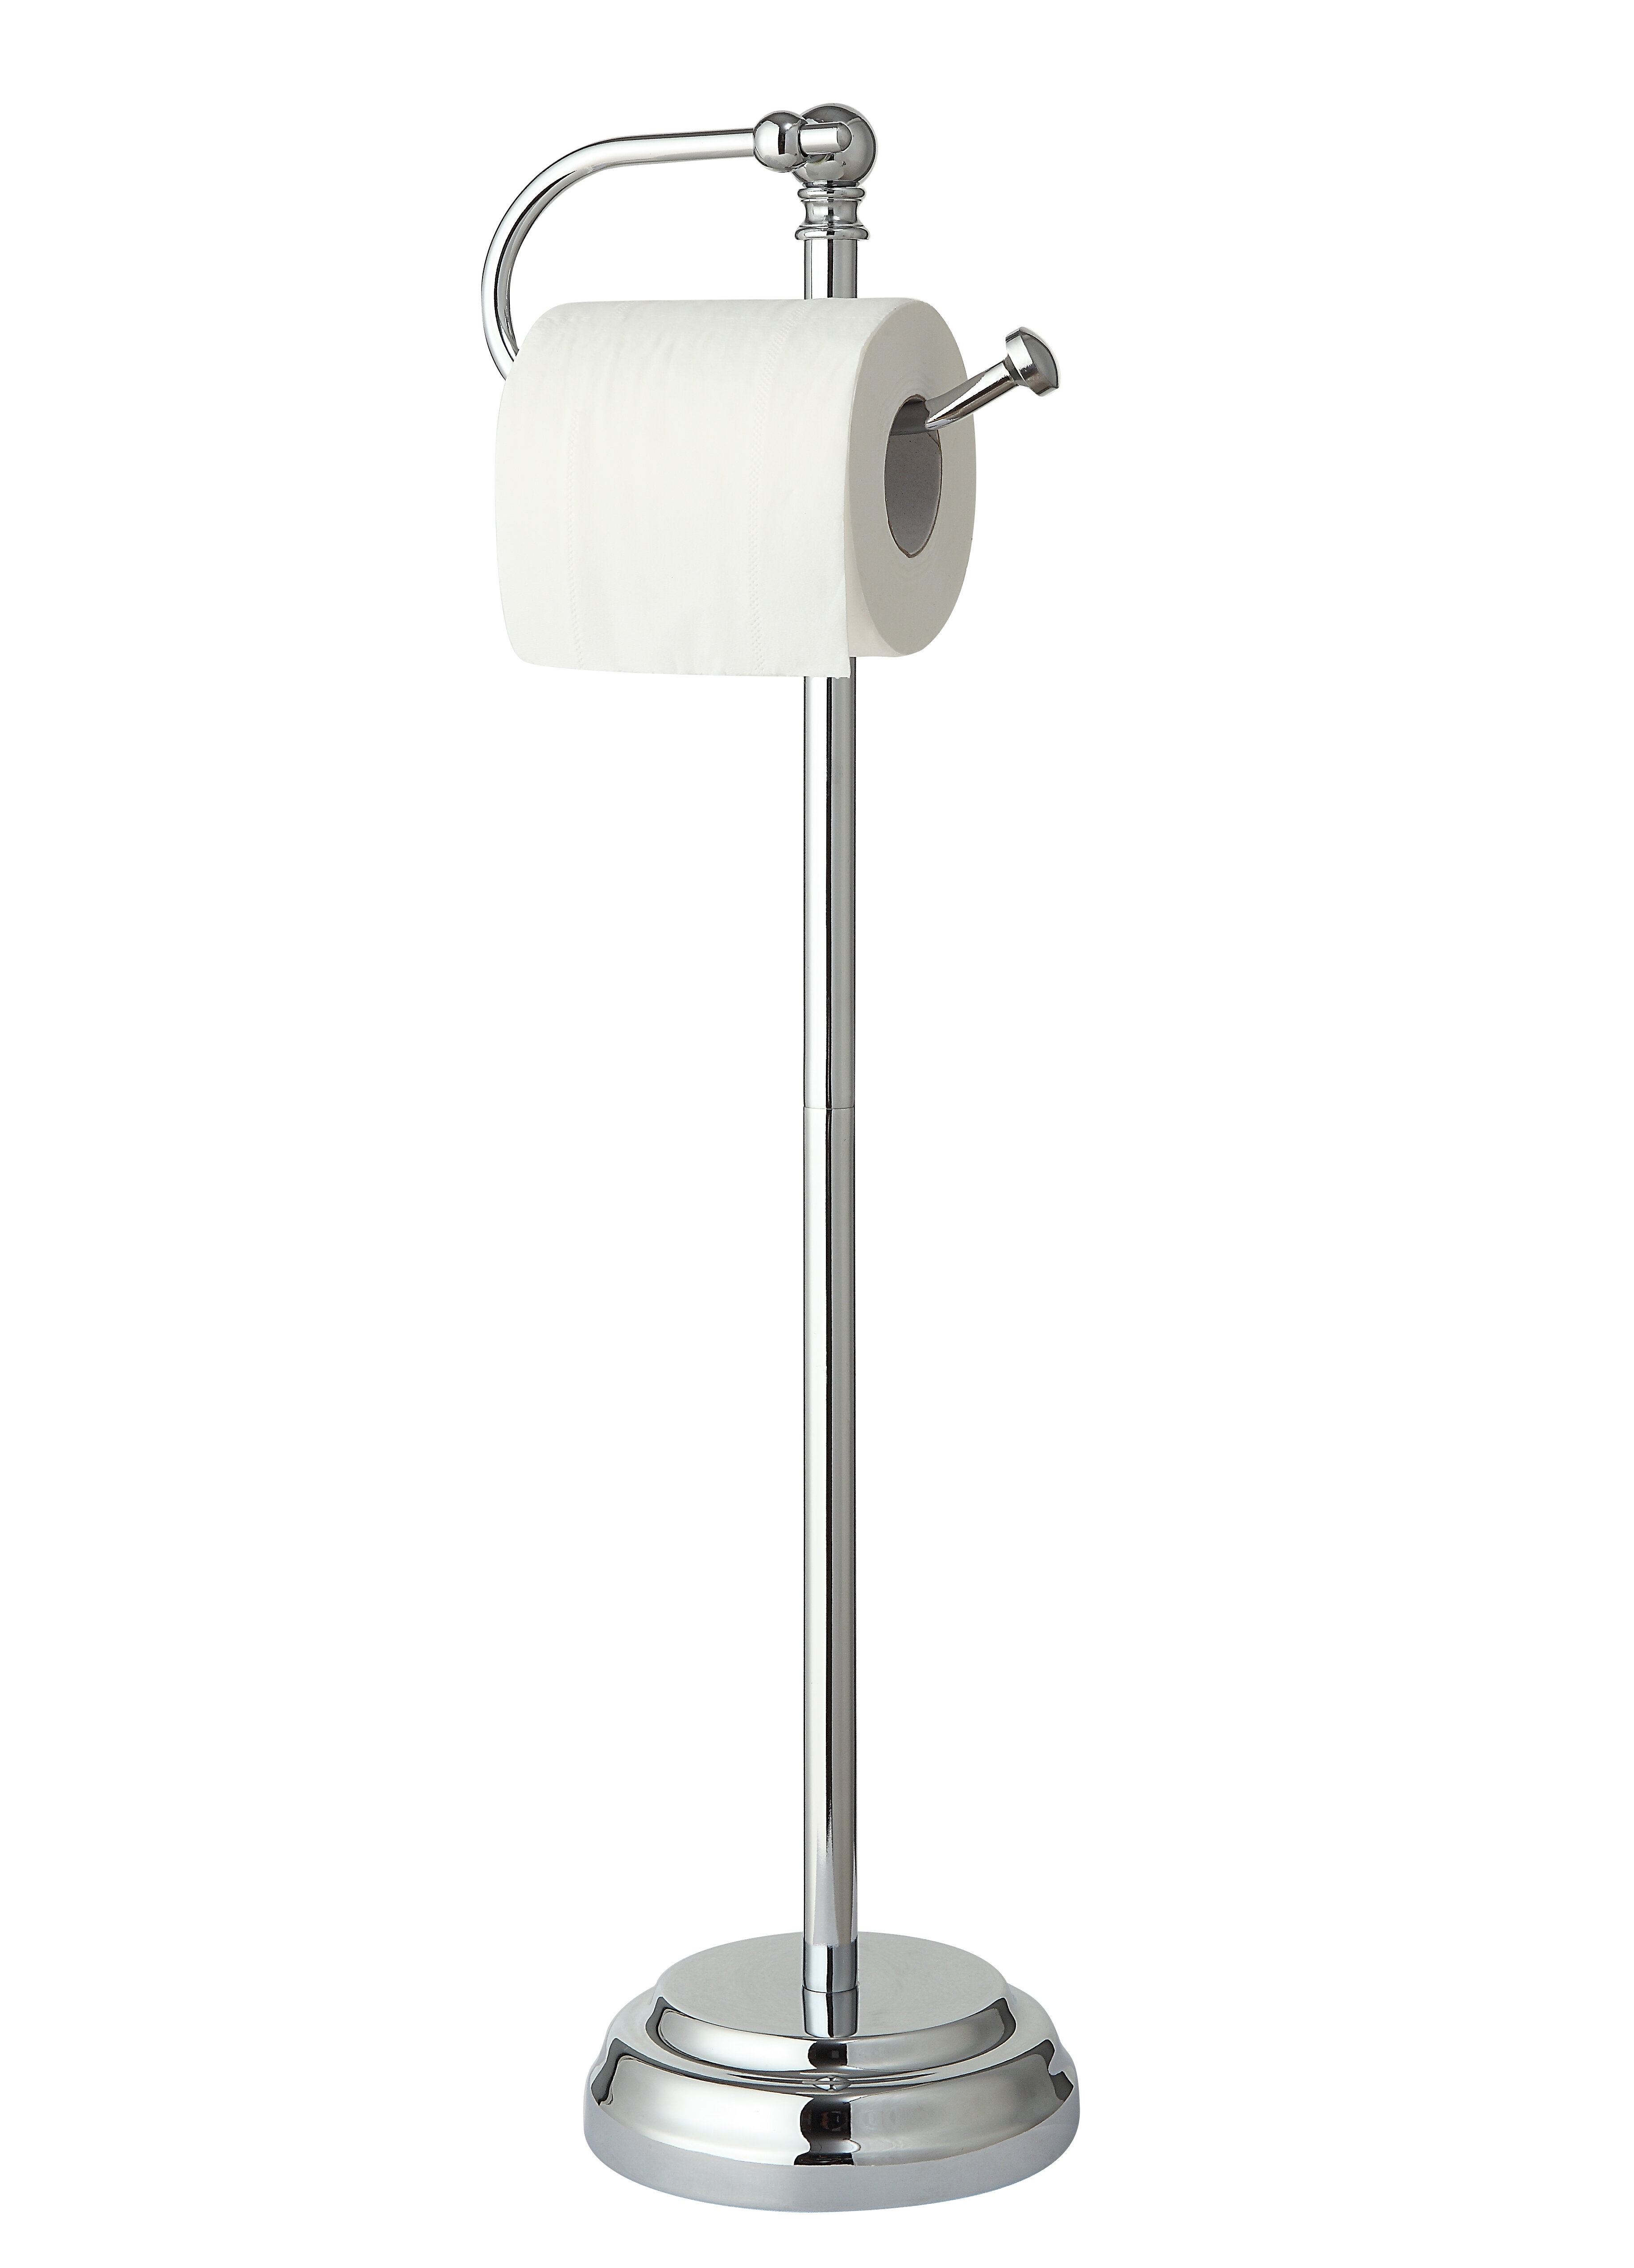 SunnyPoint Classic Bathroom Free Standing Toilet Tissue Paper Roll Holder Stand, Chrome